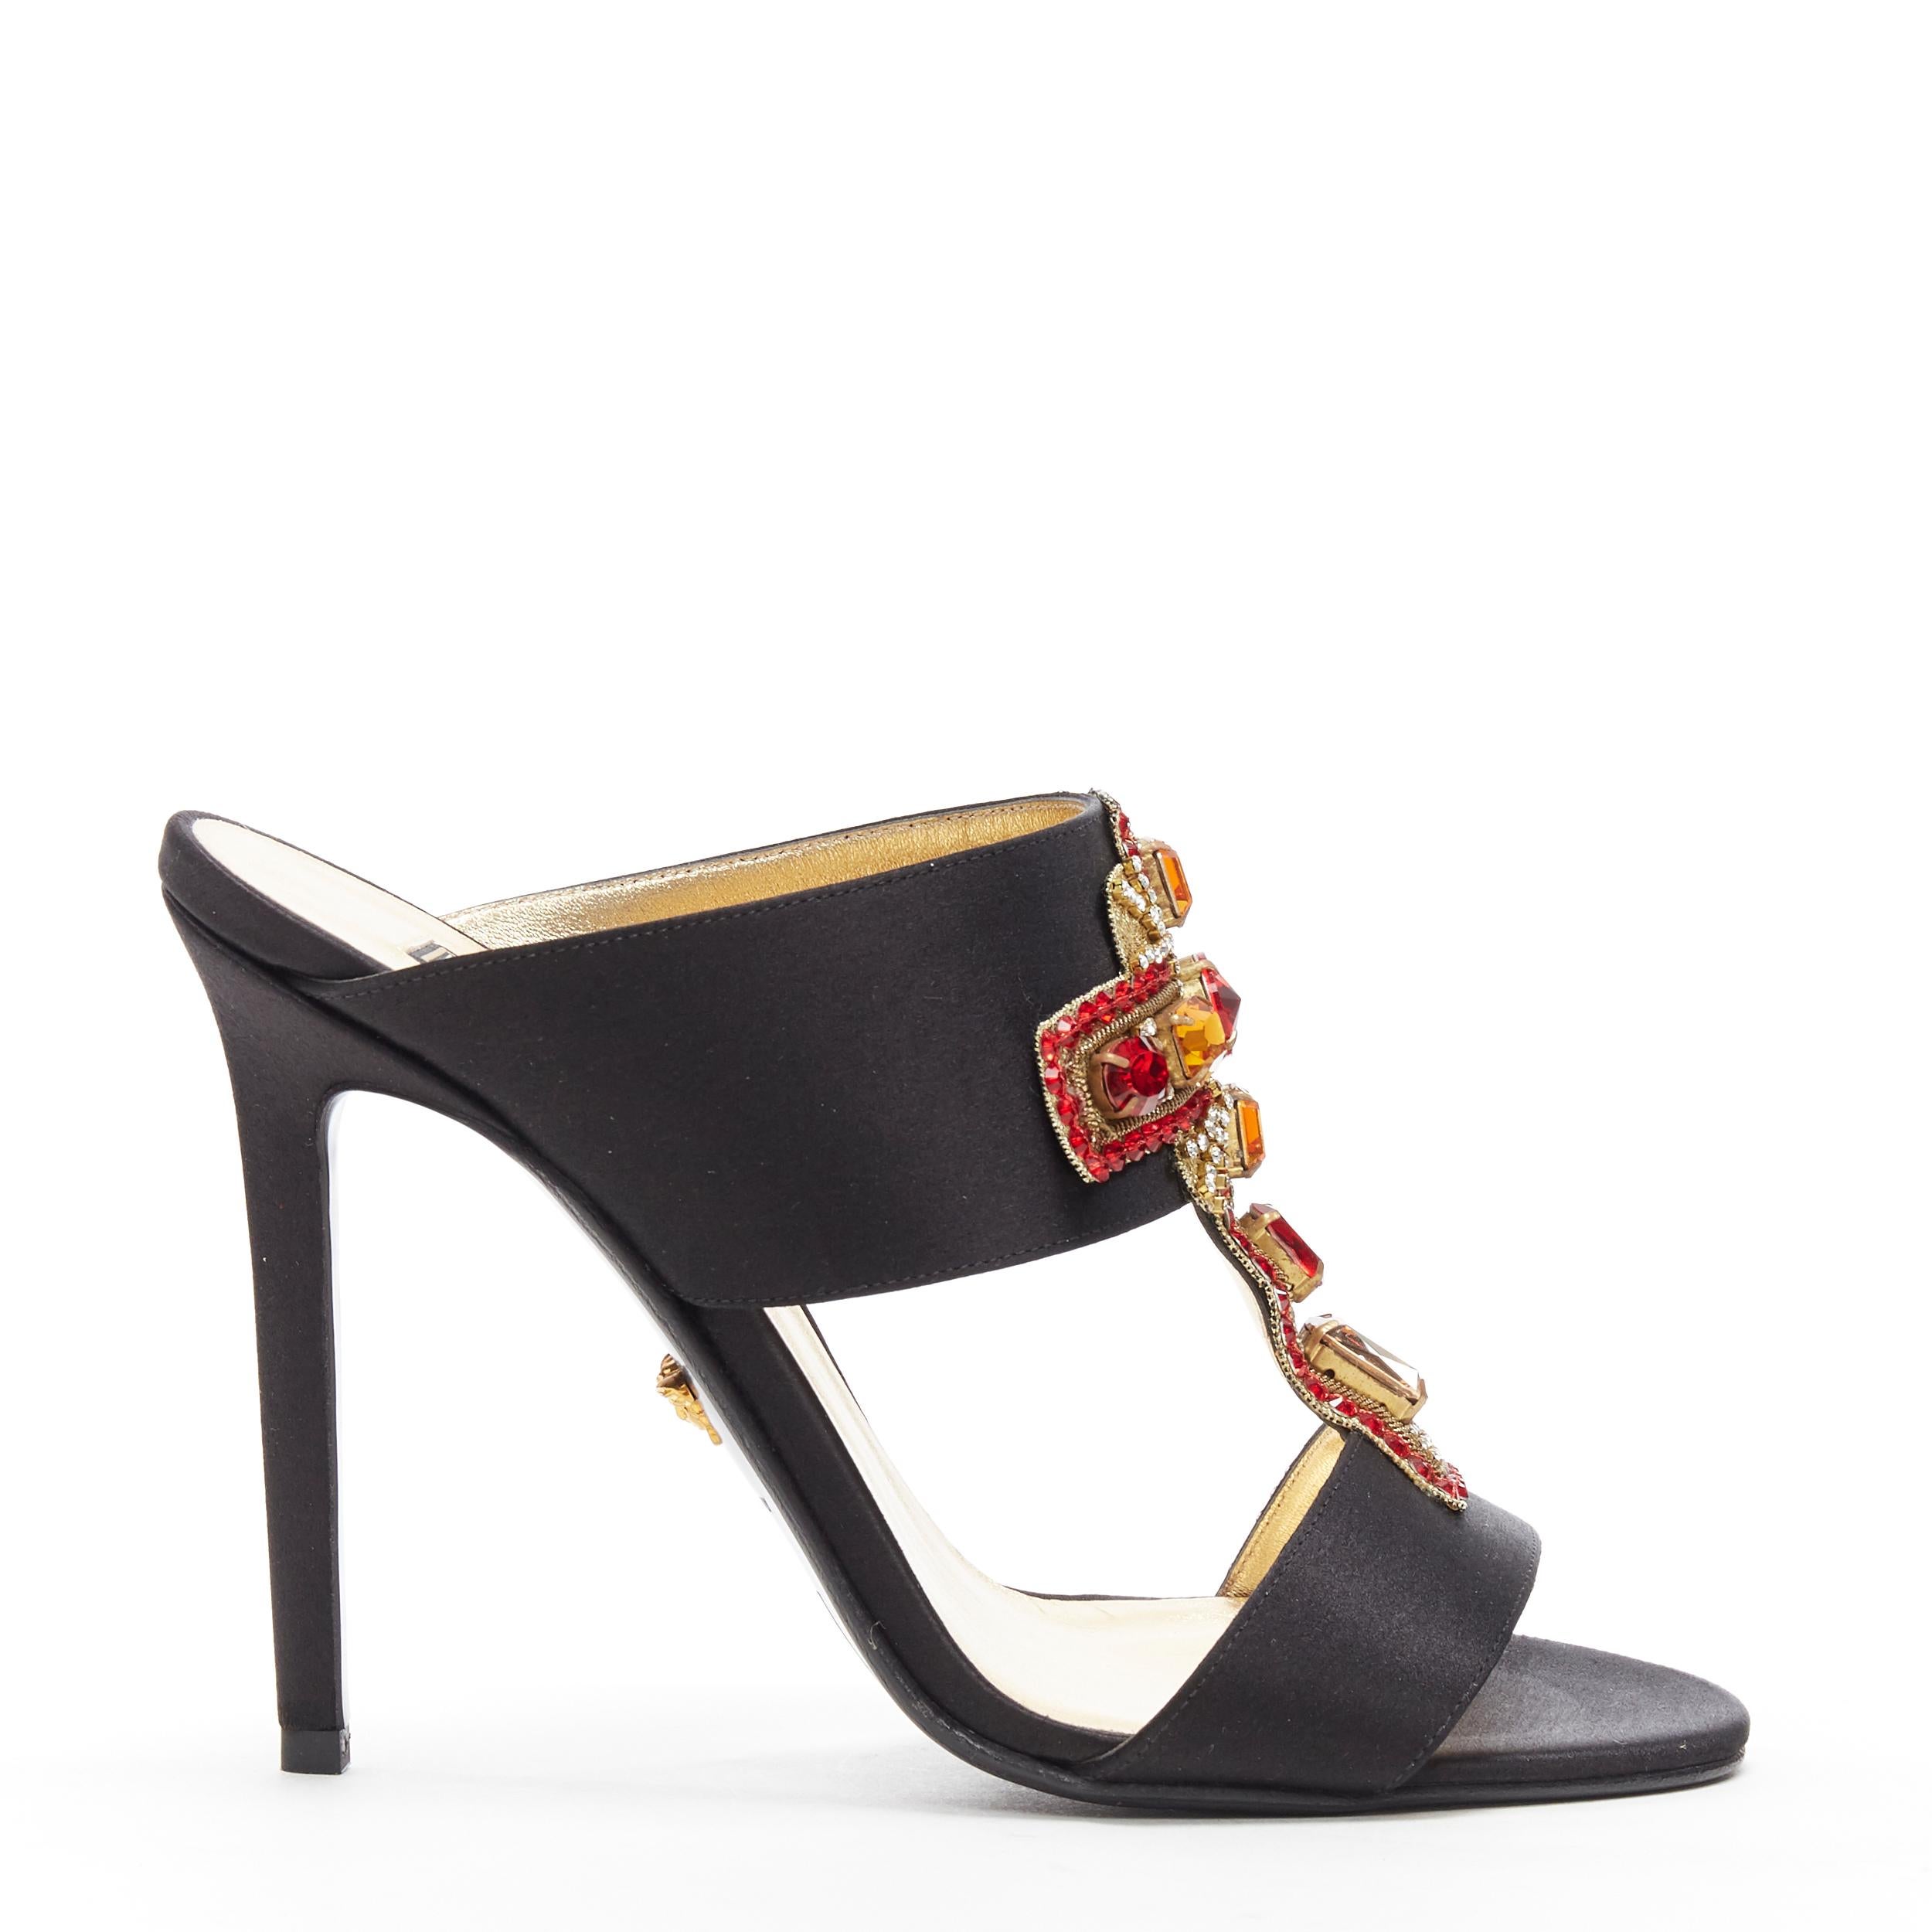 new VERSACE SS18 Tribute Byzantine Cross jewel embellished black satin mule EU37
Brand: Versace
Designer: Donatella Versace
Collection: Spring Summer 2018
Model Name / Style: Byzantine Mule
Material: Silk
Color: Black, red
Pattern: Solid
Extra